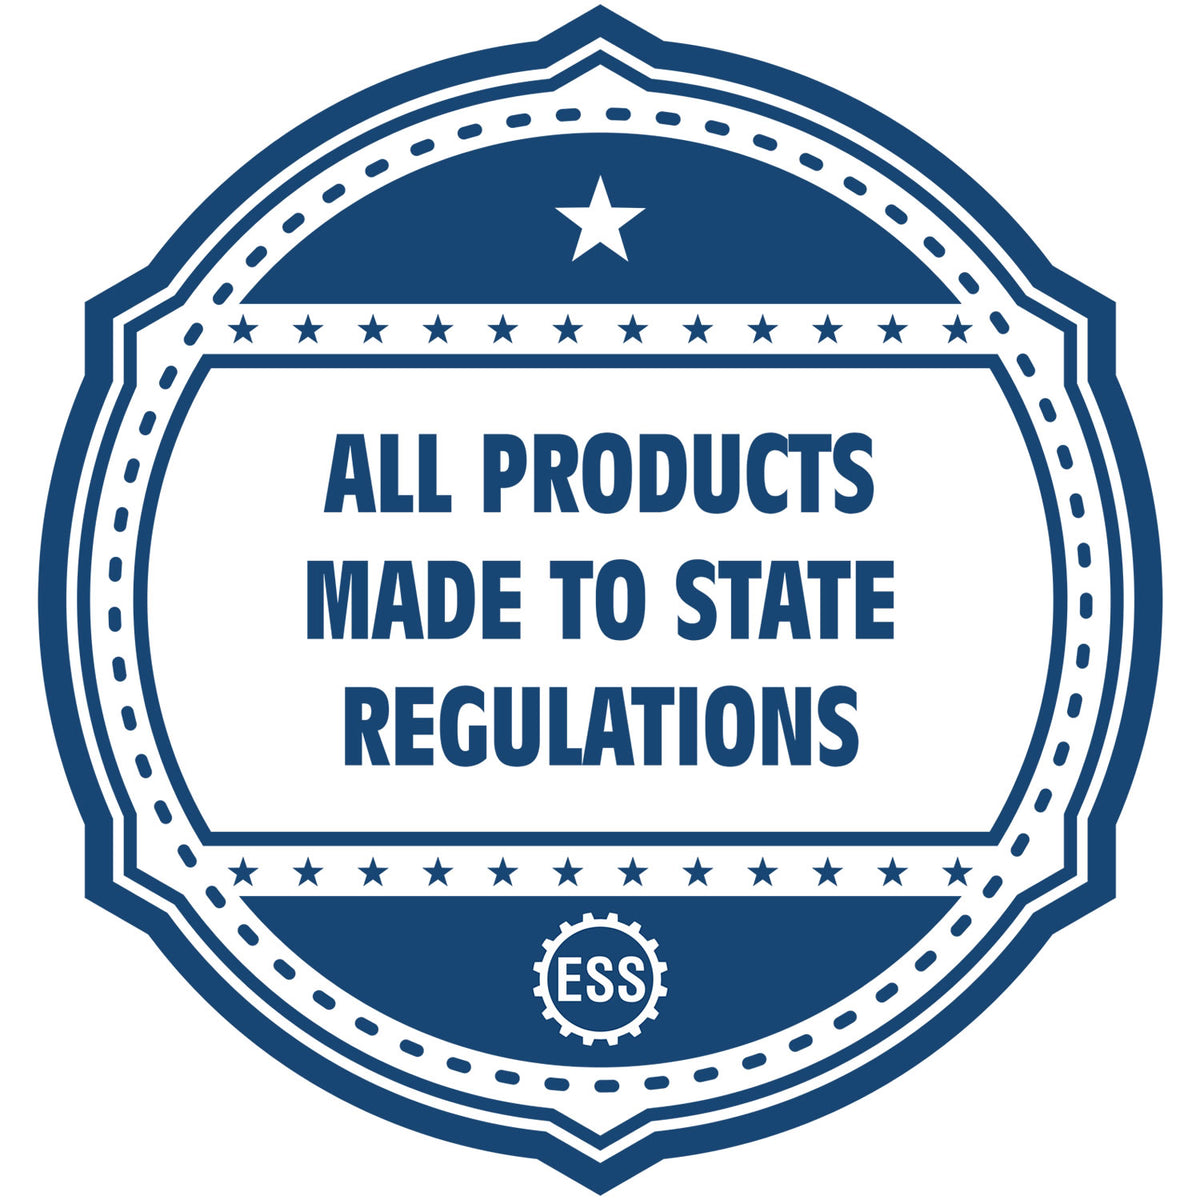 An icon or badge element for the MaxLight Premium Pre-Inked Vermont State Seal Notarial Stamp showing that this product is made in compliance with state regulations.